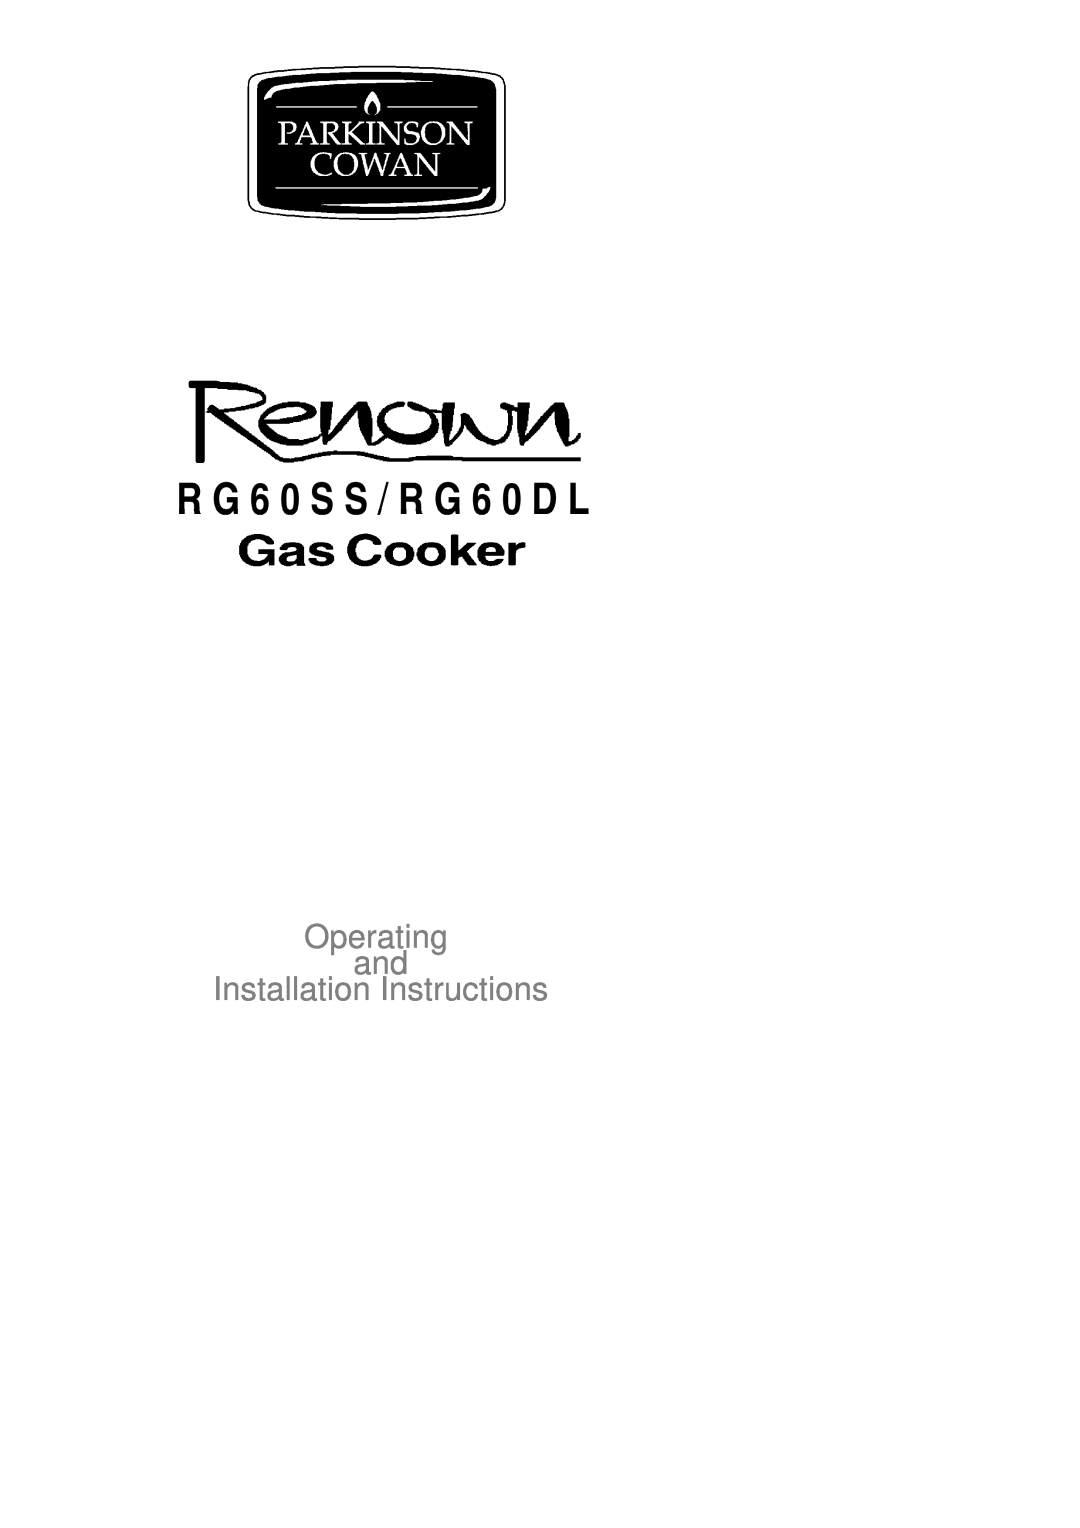 Electrolux RG60DL, RG60SS installation instructions R G 6 0 S S / R G 6 0 D L, Operating and Installation Instructions 